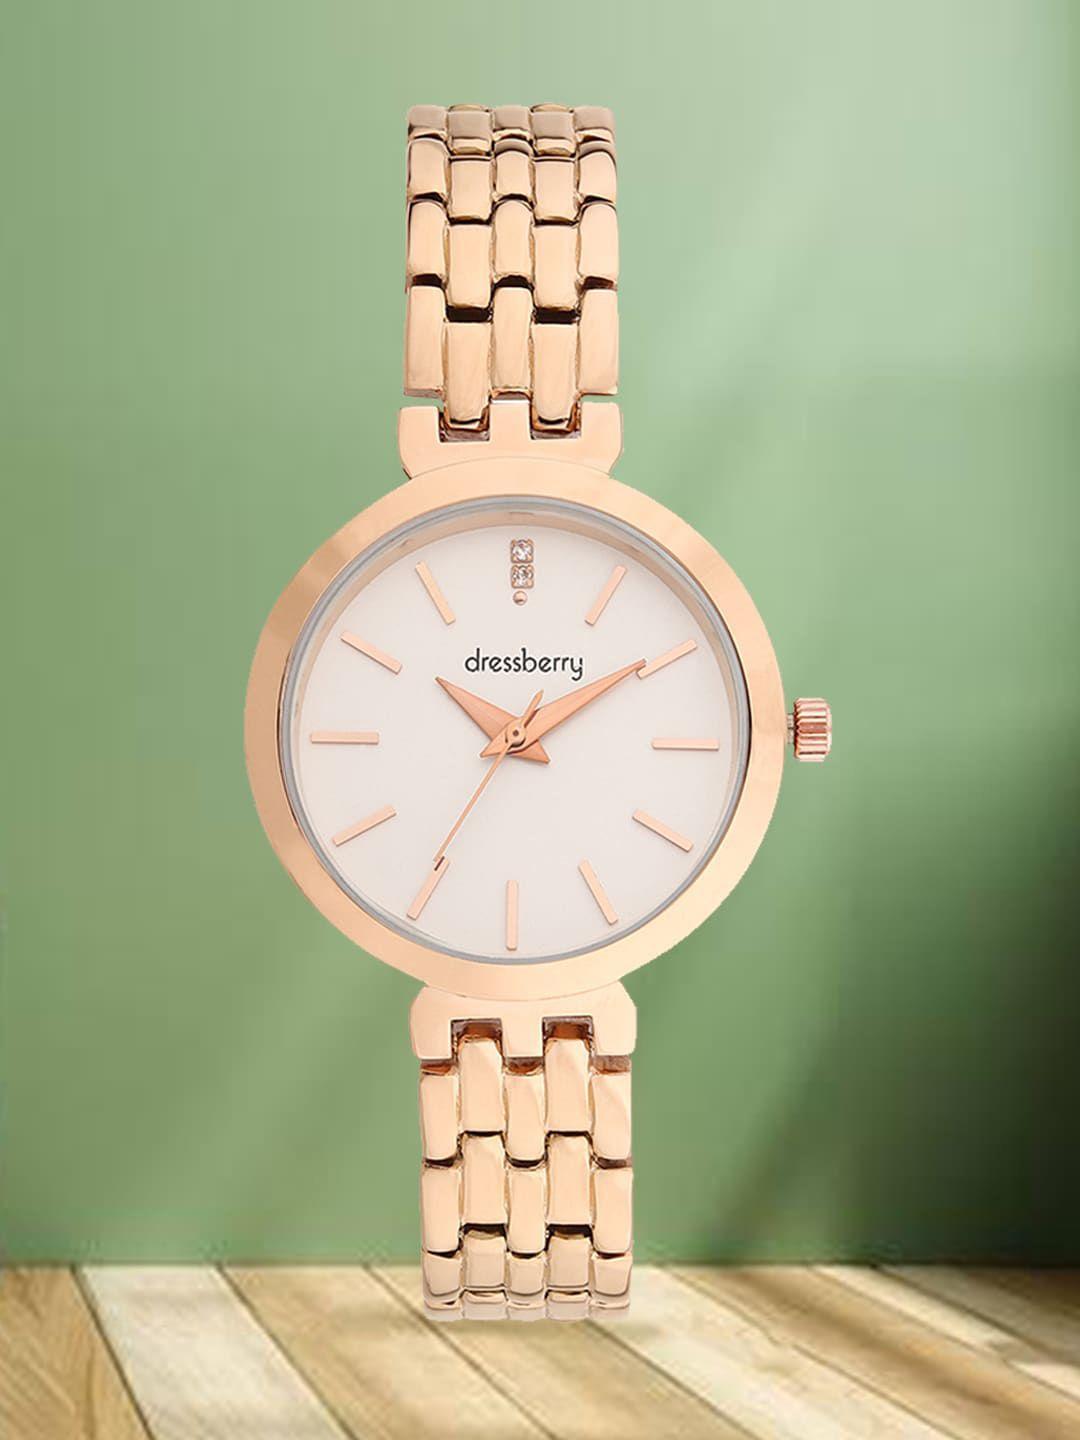 dressberry-women-white-dial-&-rose-gold-toned-bracelet-style-analogue-watch-hobdb-138-rg